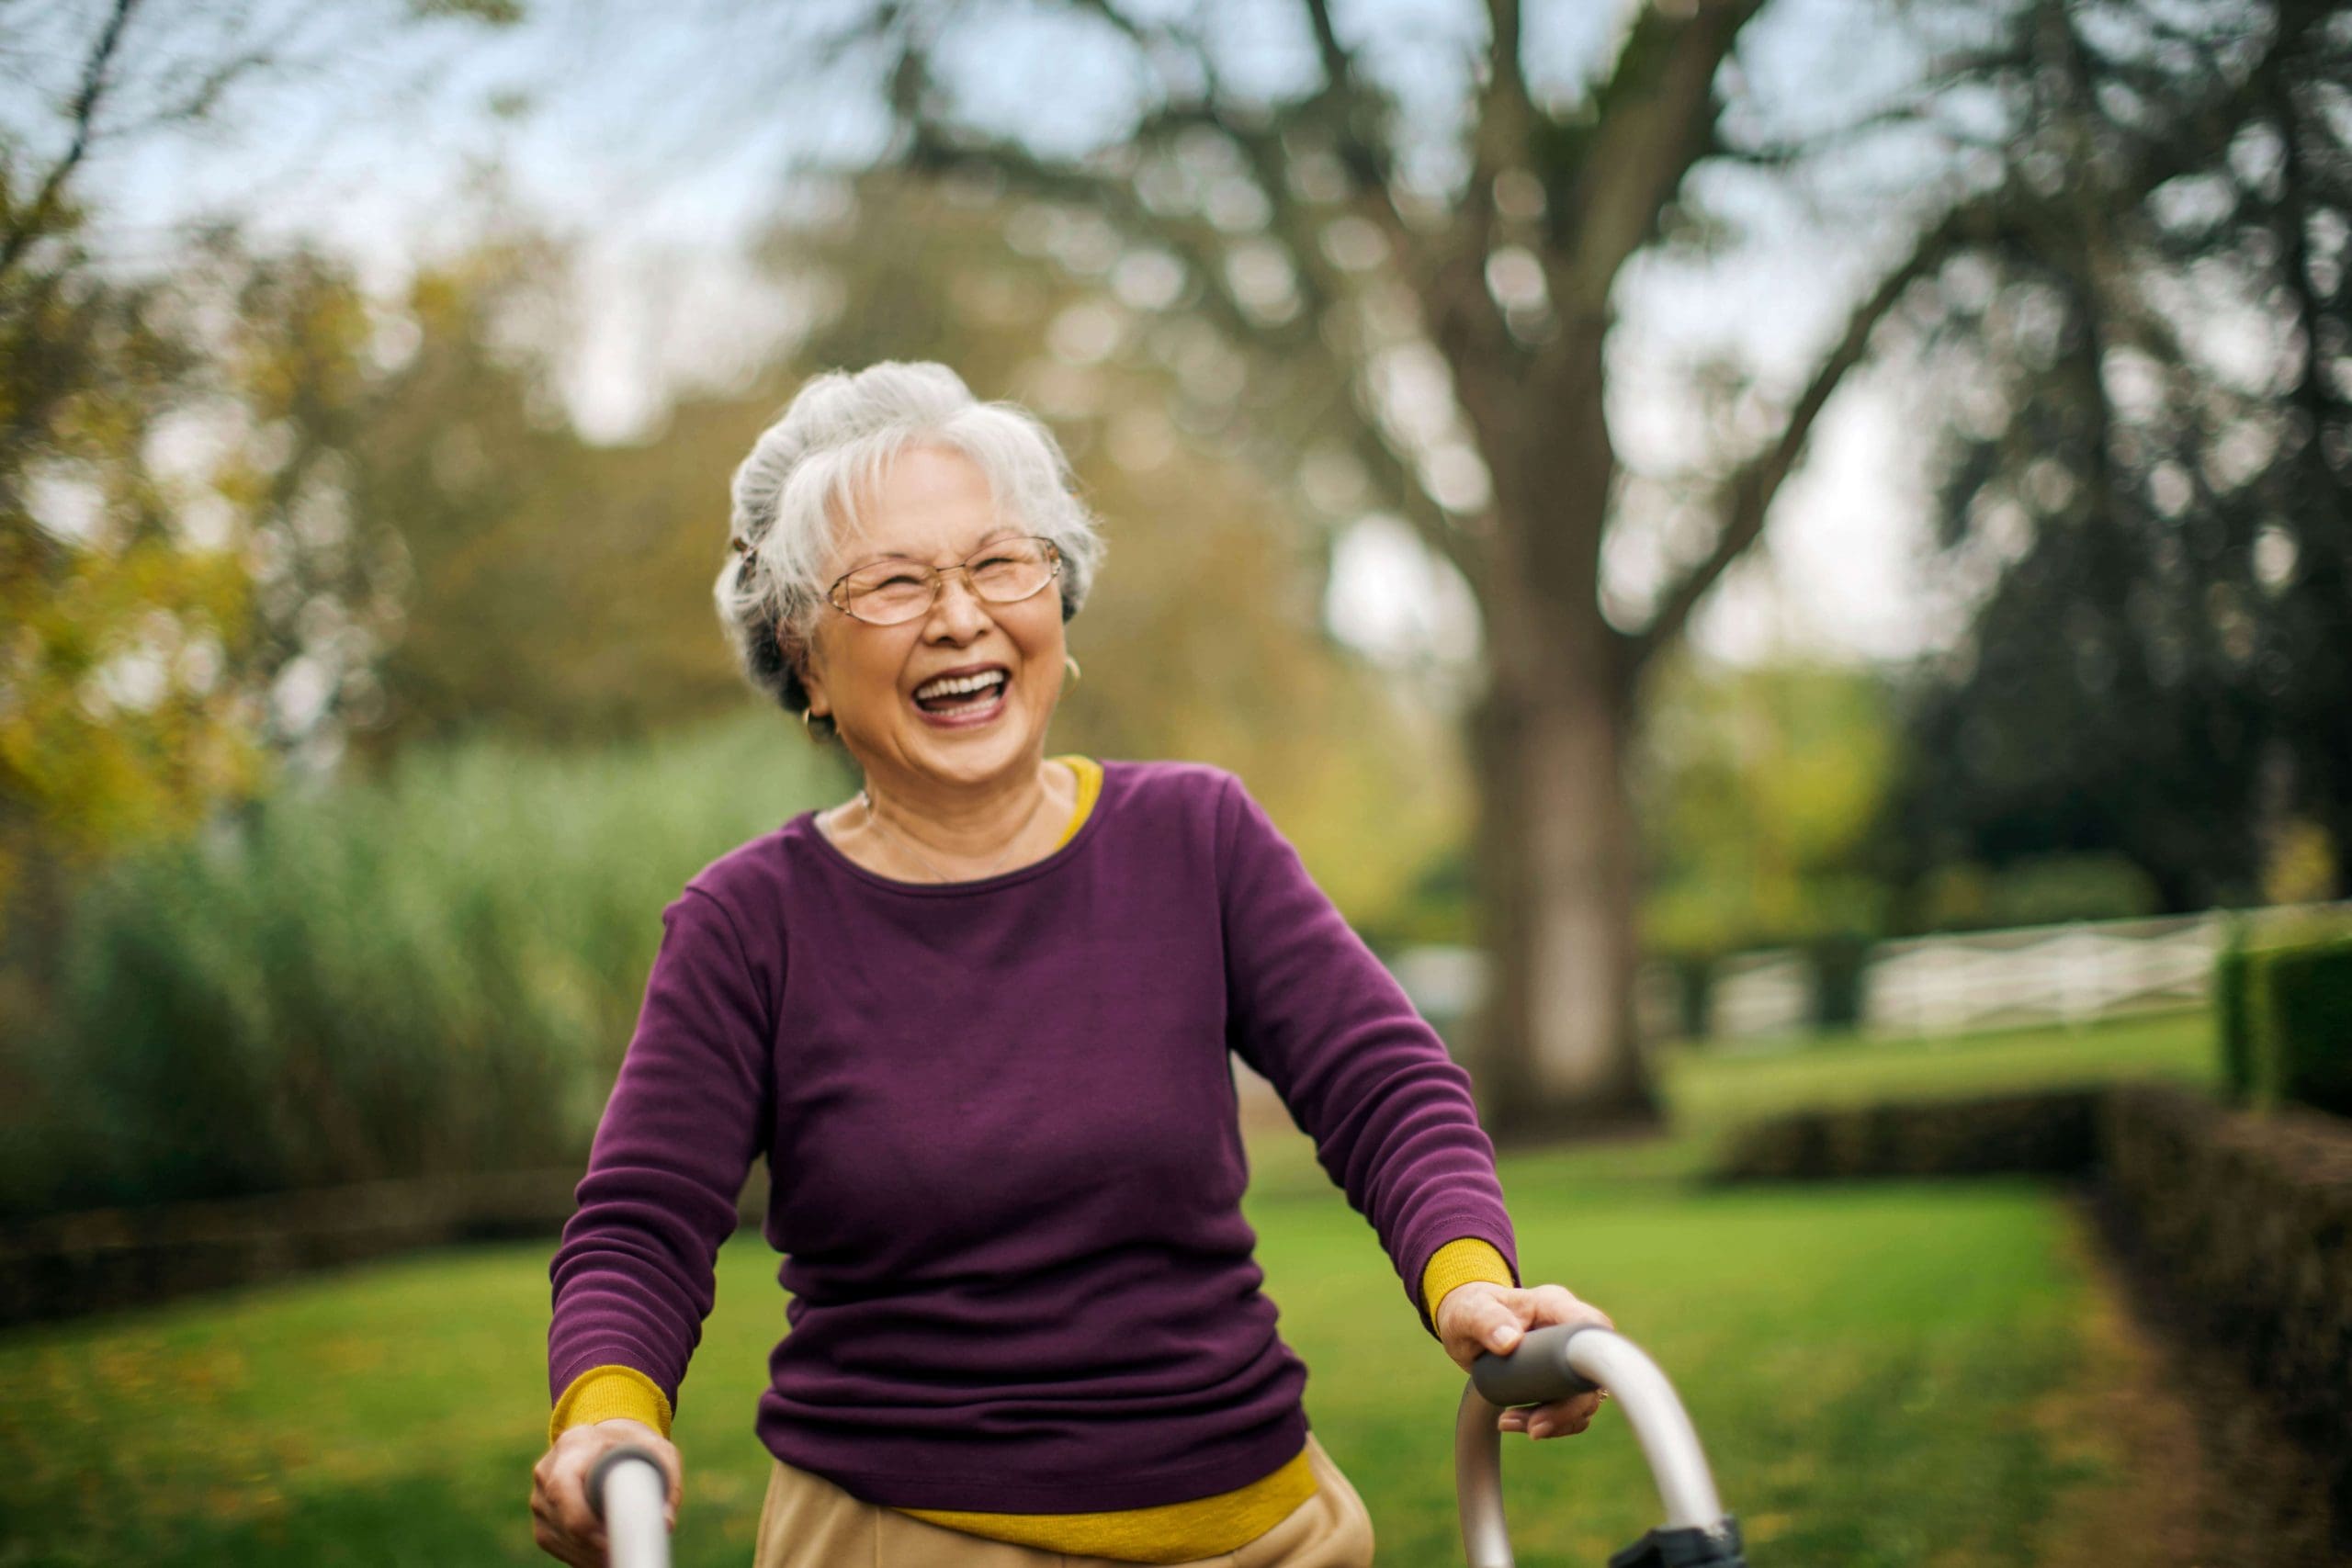 Older Asian woman happily using a walking aid to help her exercise